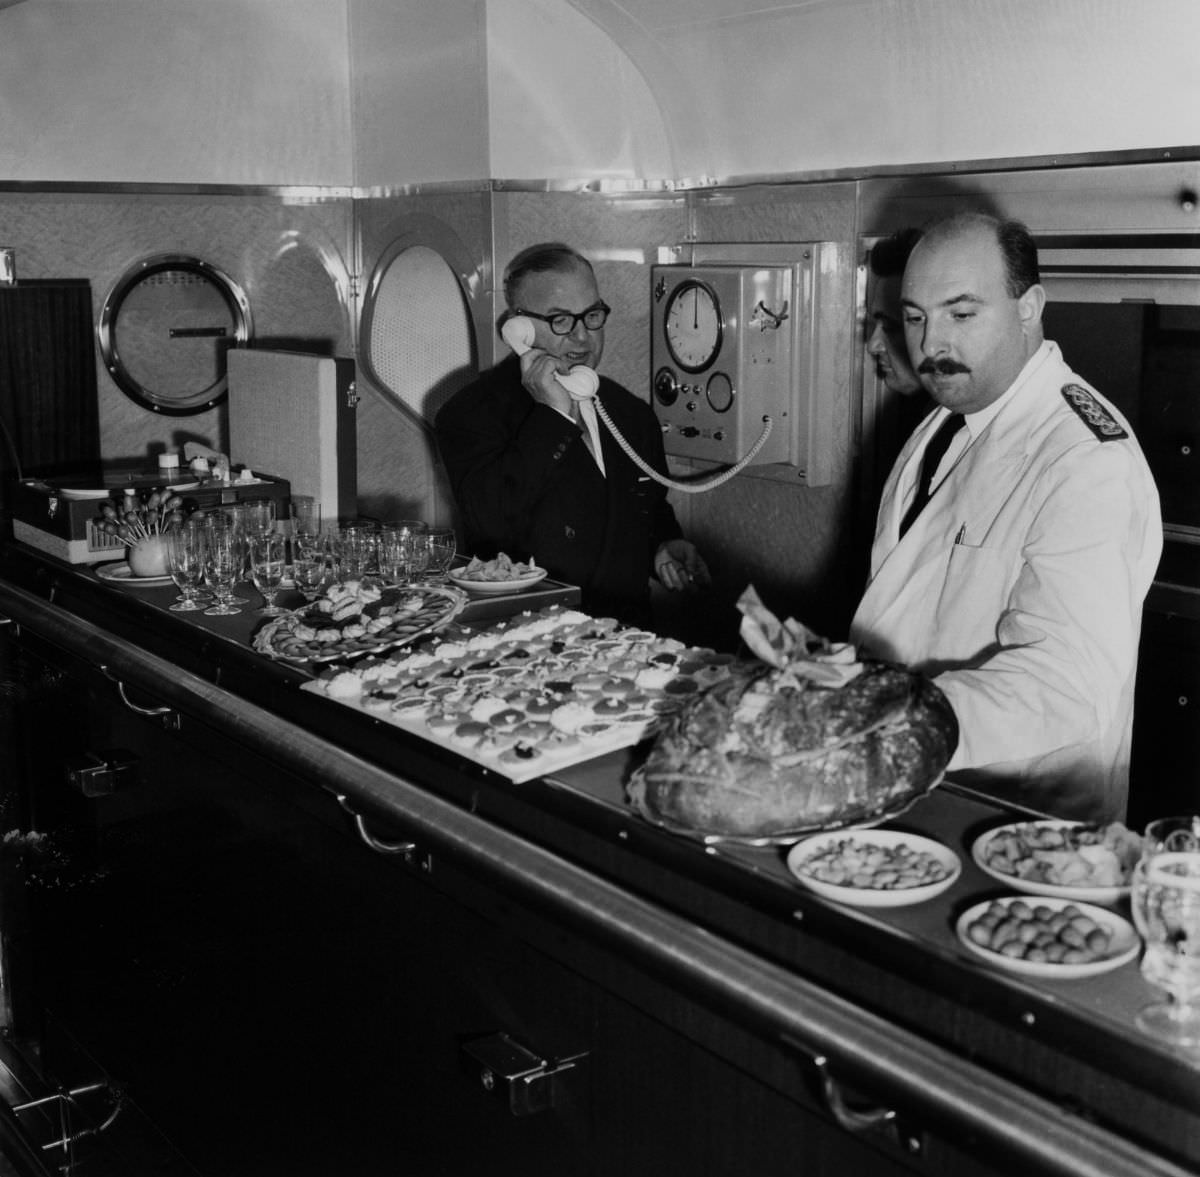 A new restaurant car was launched on the Paris-Lille railway in France, 1959.